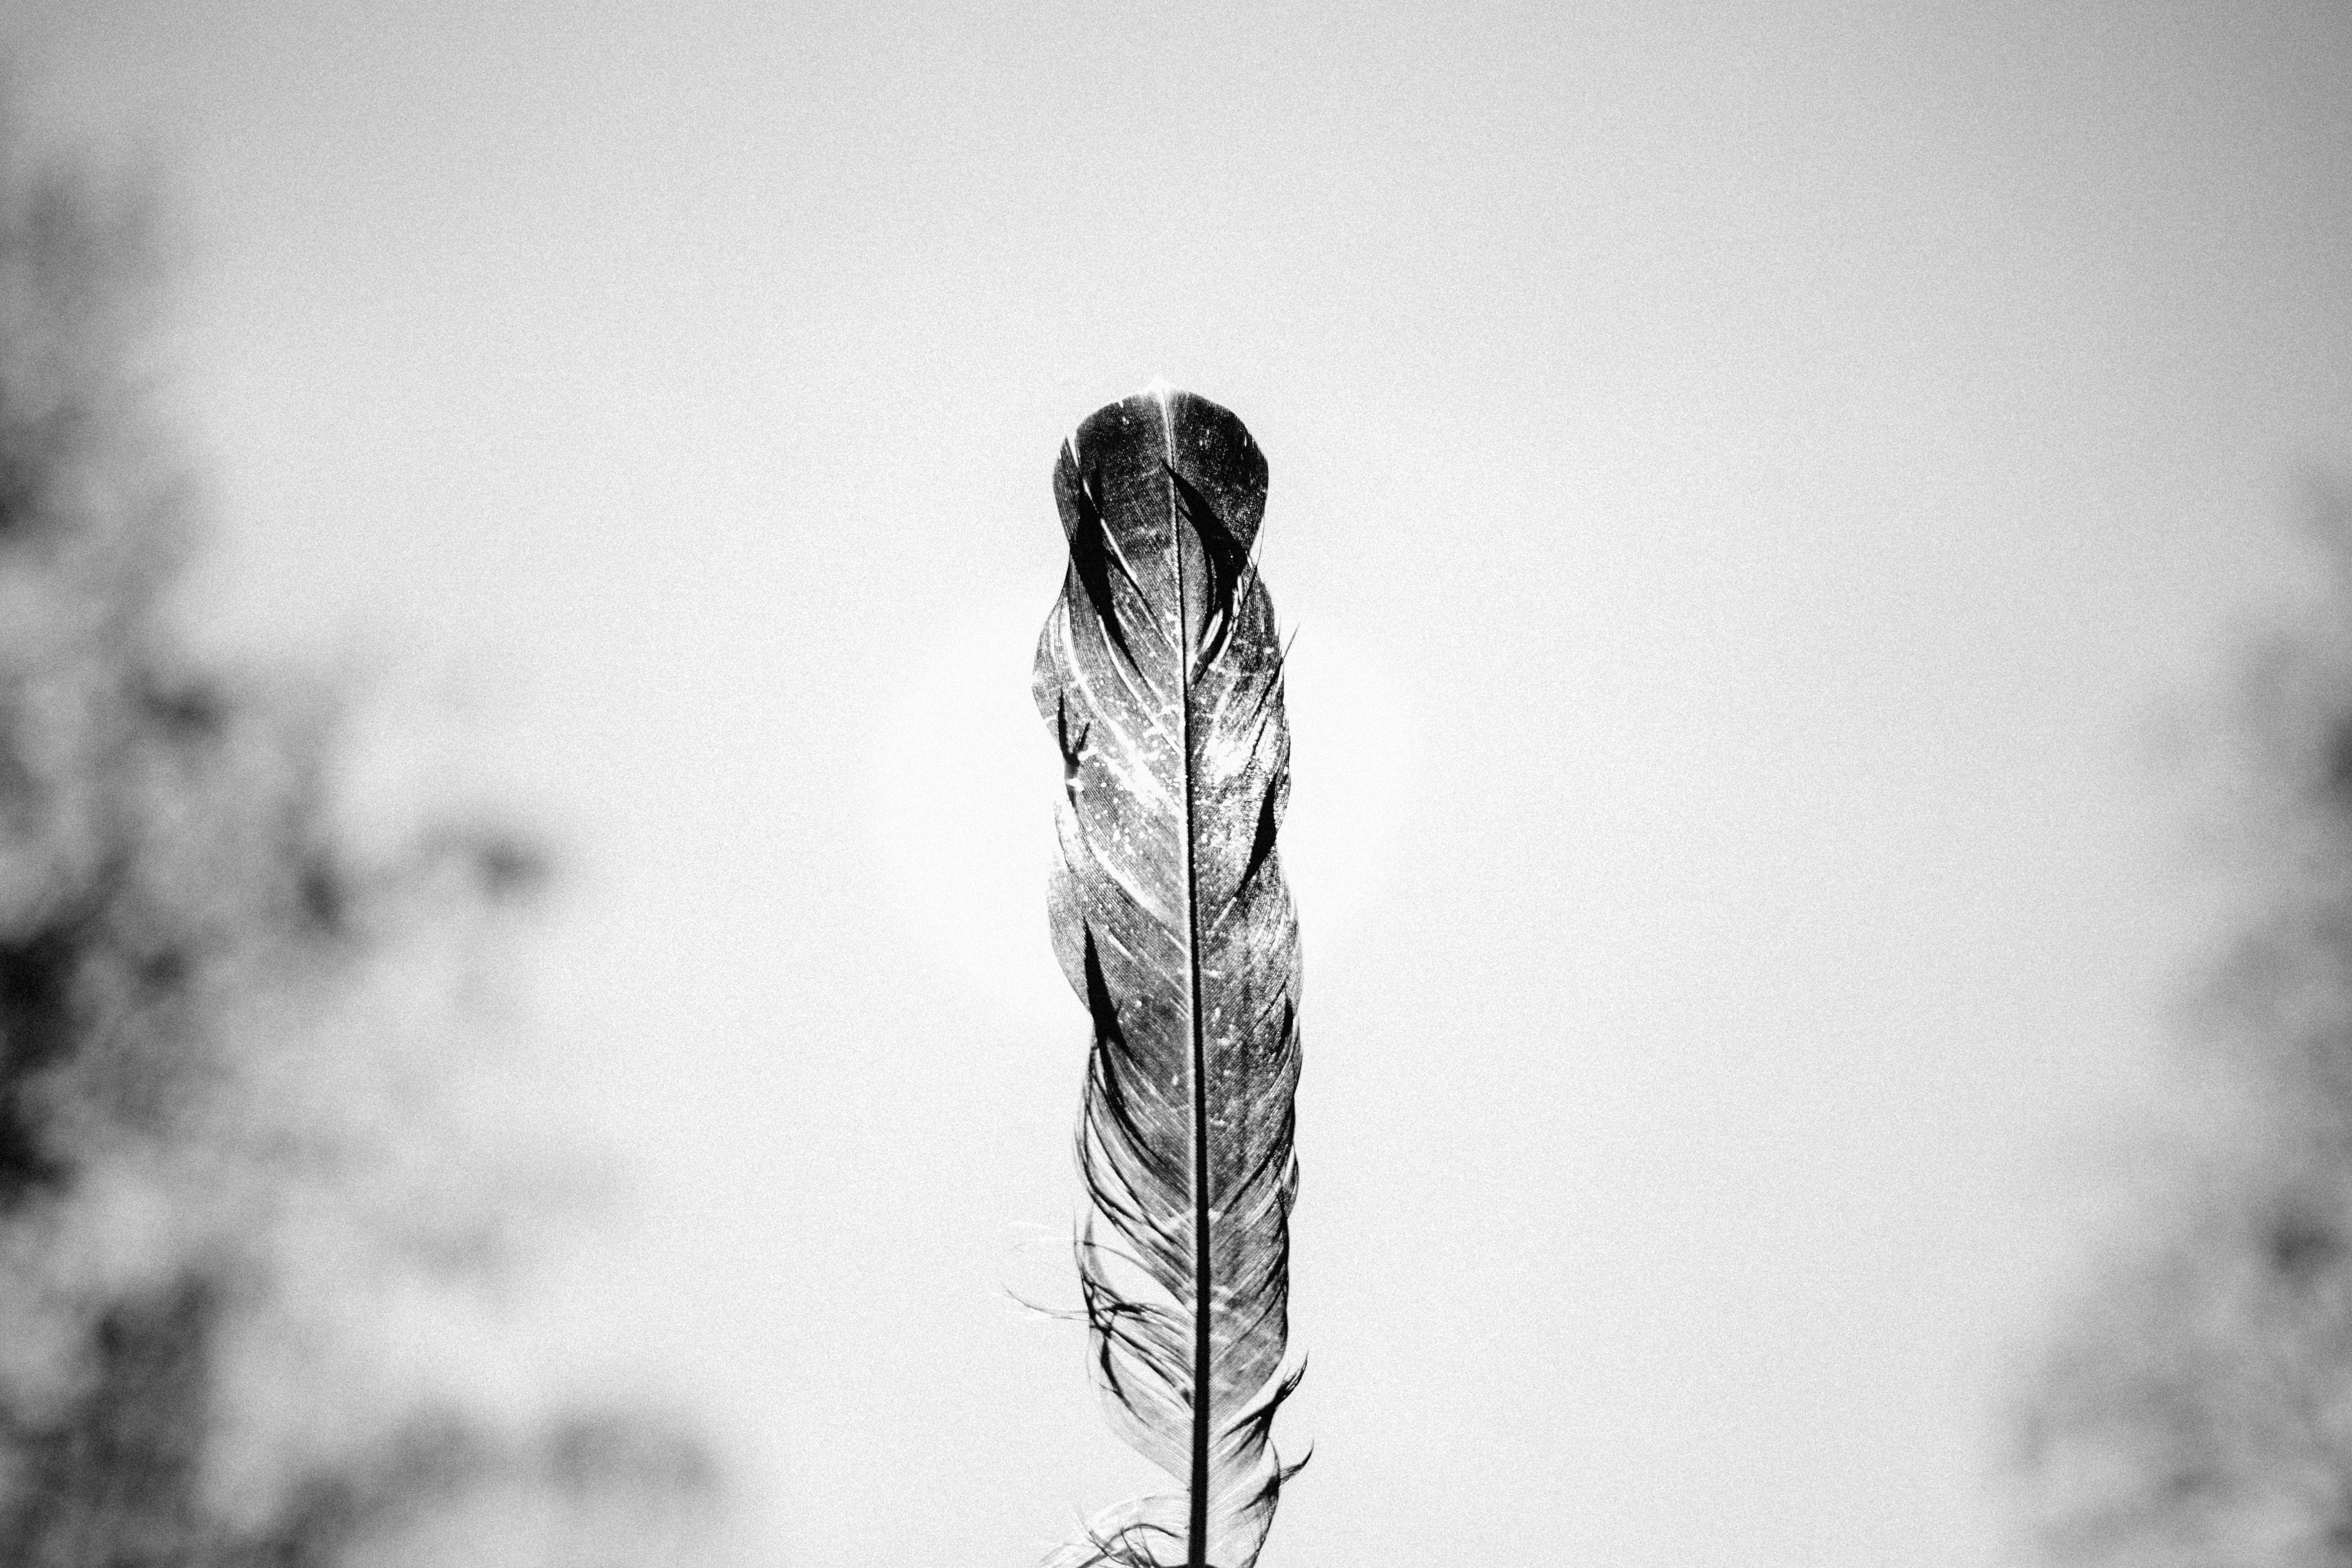 142257 Screensavers and Wallpapers Pen for phone. Download feather, minimalism, bw, chb, pen pictures for free